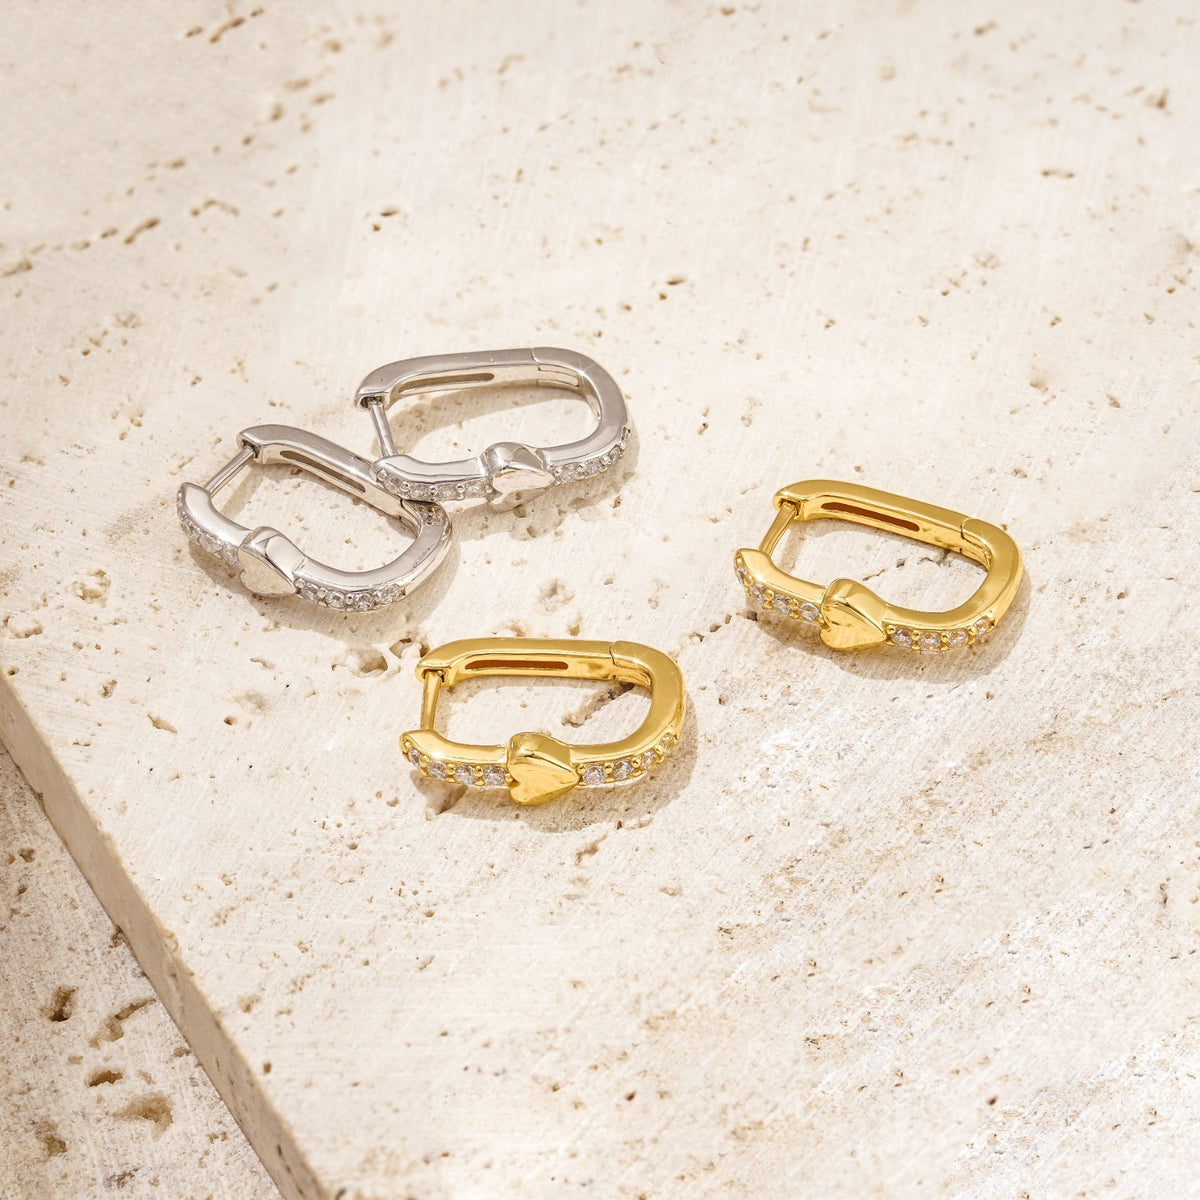 unique earrings with a dainty gold heart amid white zirconia stones. These hoop earrings have a unique shape. Available in gold and silver. 